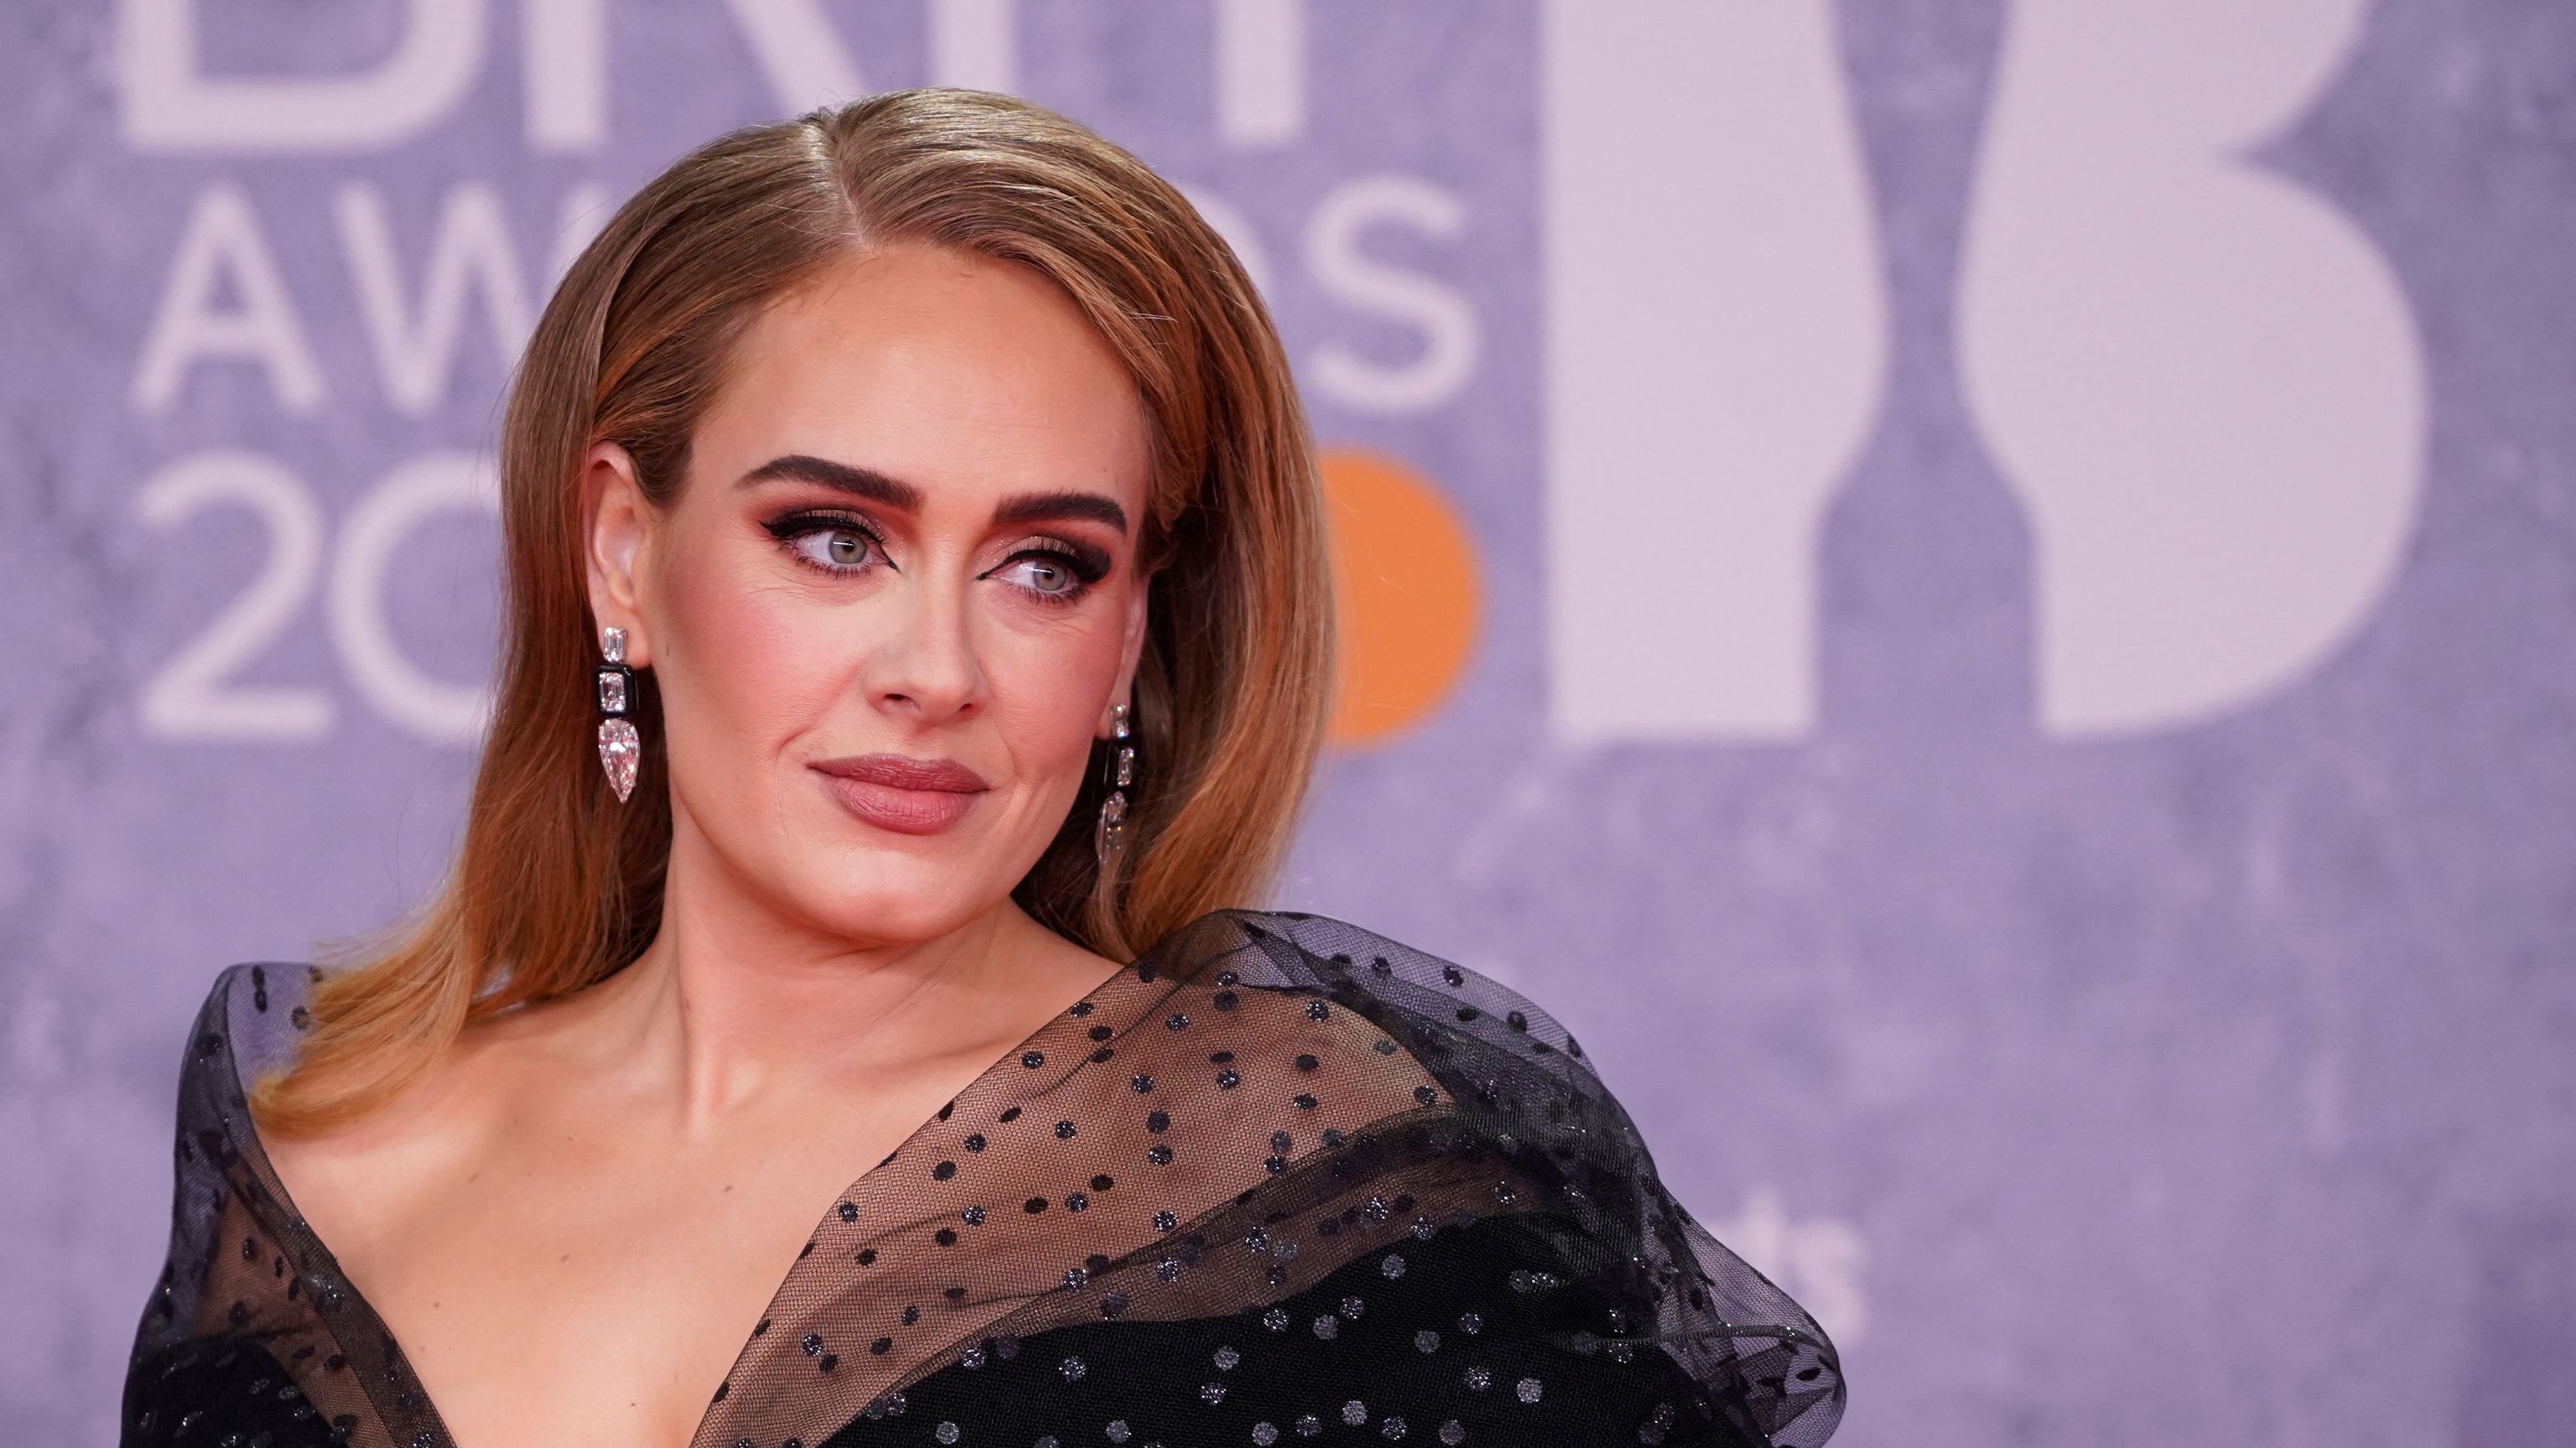 British singer  lt;HIT gt;Adele lt;/HIT gt; Laurie Blue Adkins aka  lt;HIT gt;Adele lt;/HIT gt; poses on the red carpet upon her arrival for the BRIT Awards 2022 in London on February 8, 2022. (Photo by Niklas HALLE'N / AFP) / RESTRICTED TO EDITORIAL USE - NO POSTERS - NO MERCHANDISE- NO USE IN PUBLICATIONS DEVOTED TO ARTISTS